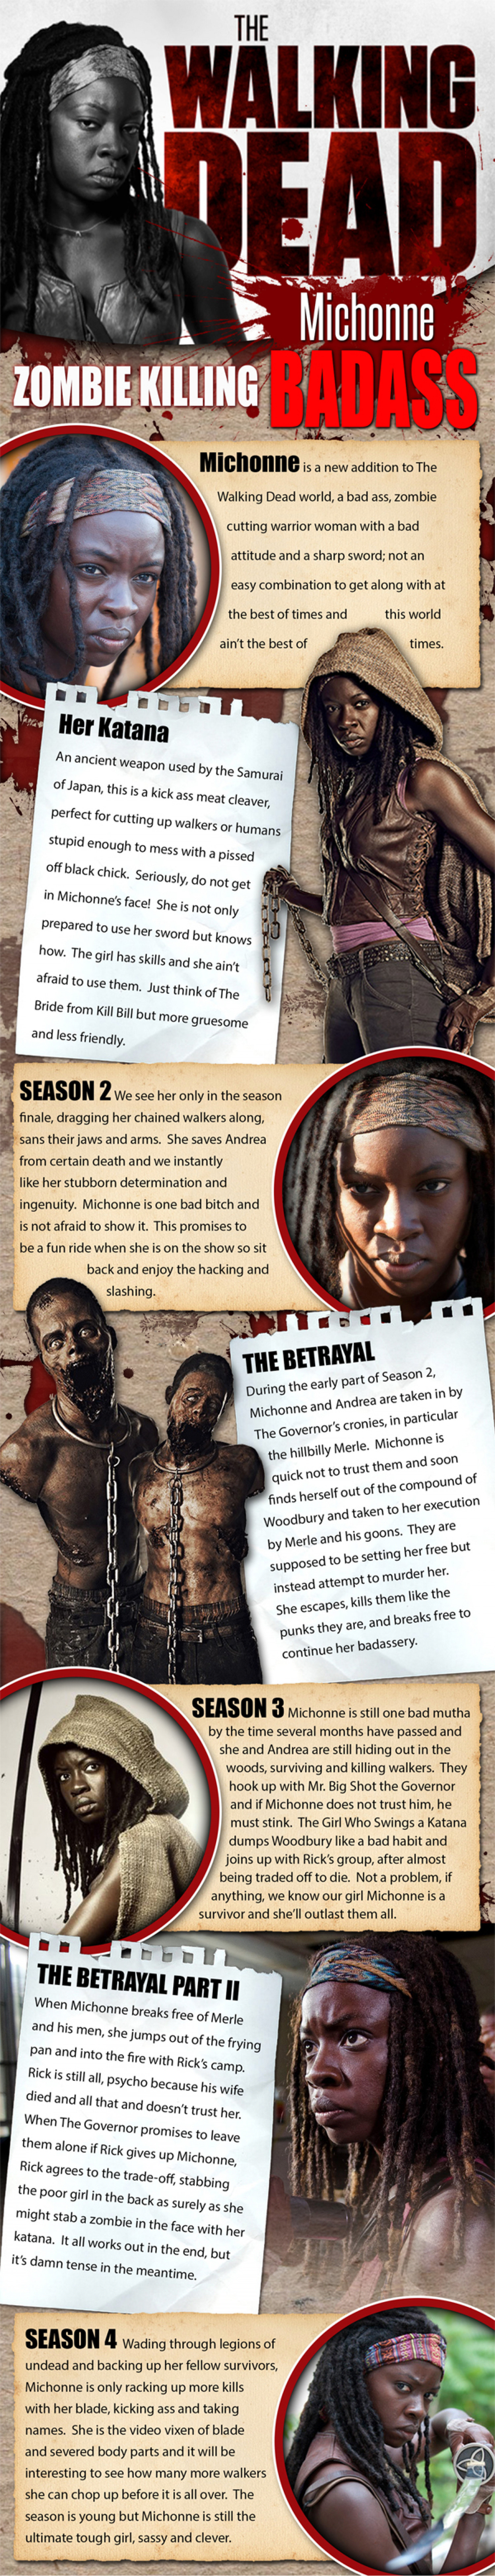 The Walking Dead- The Evolution of Michonne Infographic